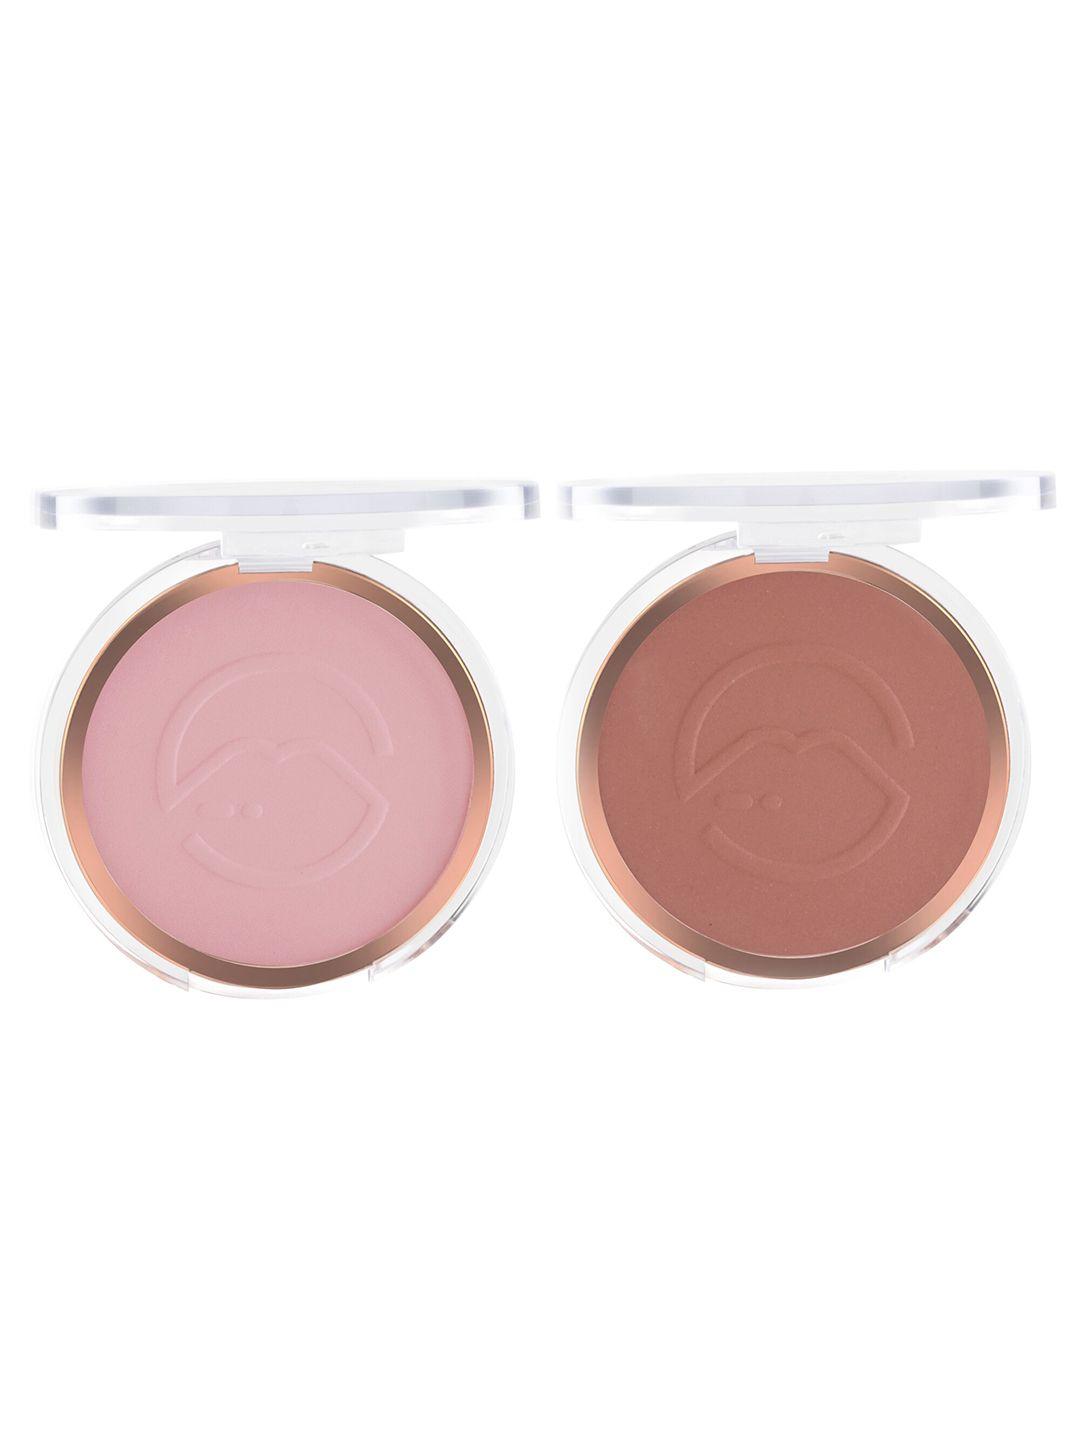 mars set of 2 flush of love highly pigmented matte face blusher - shade 02 & 06